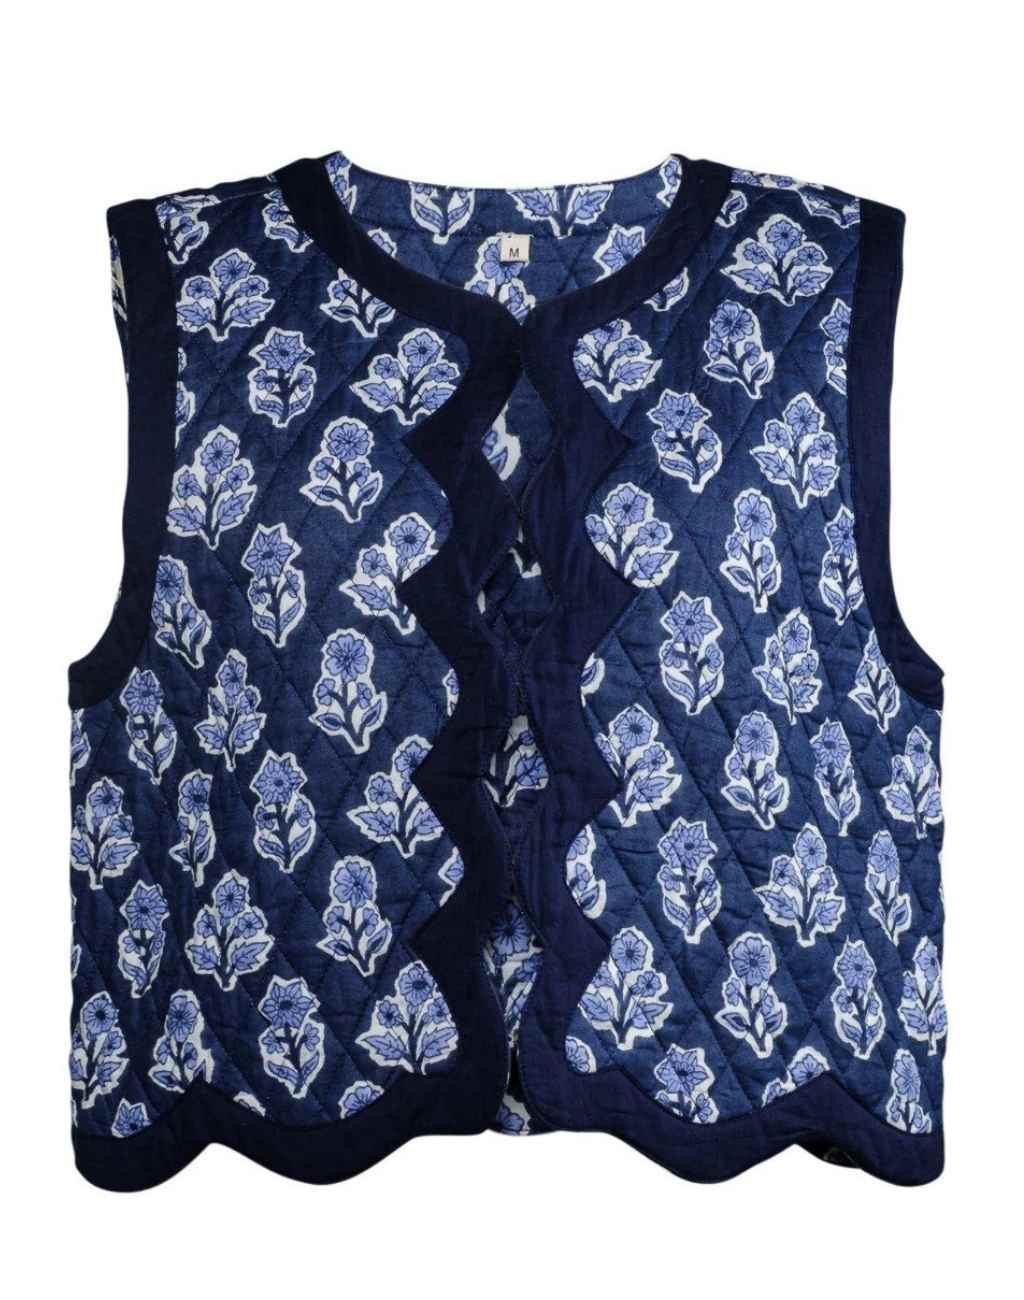 Blockprint Celest Vest in Navy Floral with Precious Scalloped Border - Visit Nifty Ophelia &amp; Indigo 